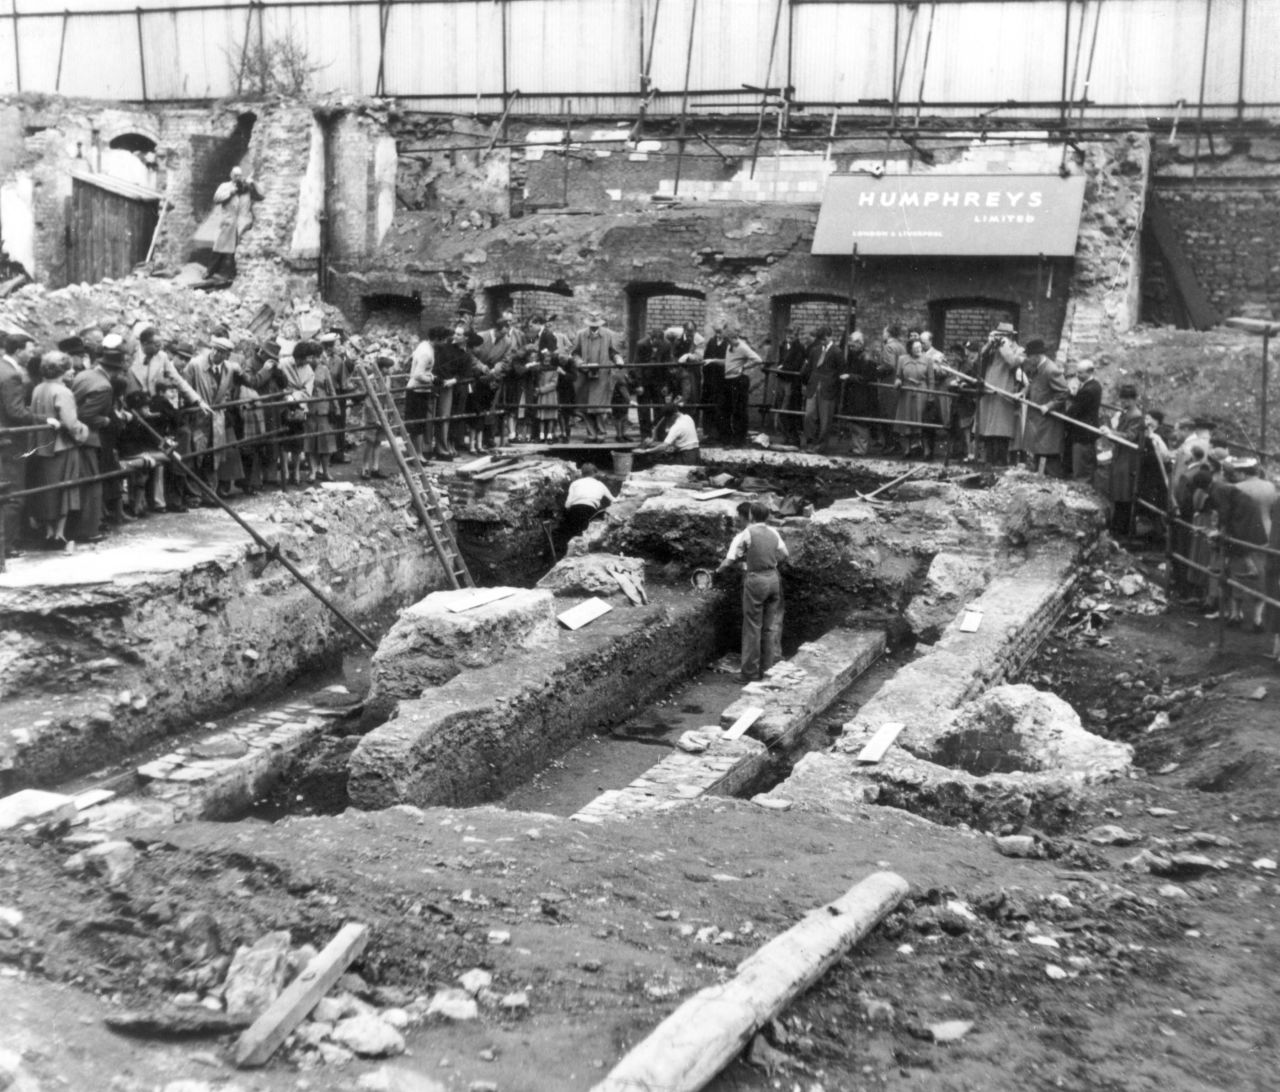  The first excavation of the Temple of Mithras excavation in 1954 by eminent archaeologist W.F. Grimes. The discovery was perhaps the most famous excavation of the 20th century, with hundreds of thousands of people flocking to see the work unfold.